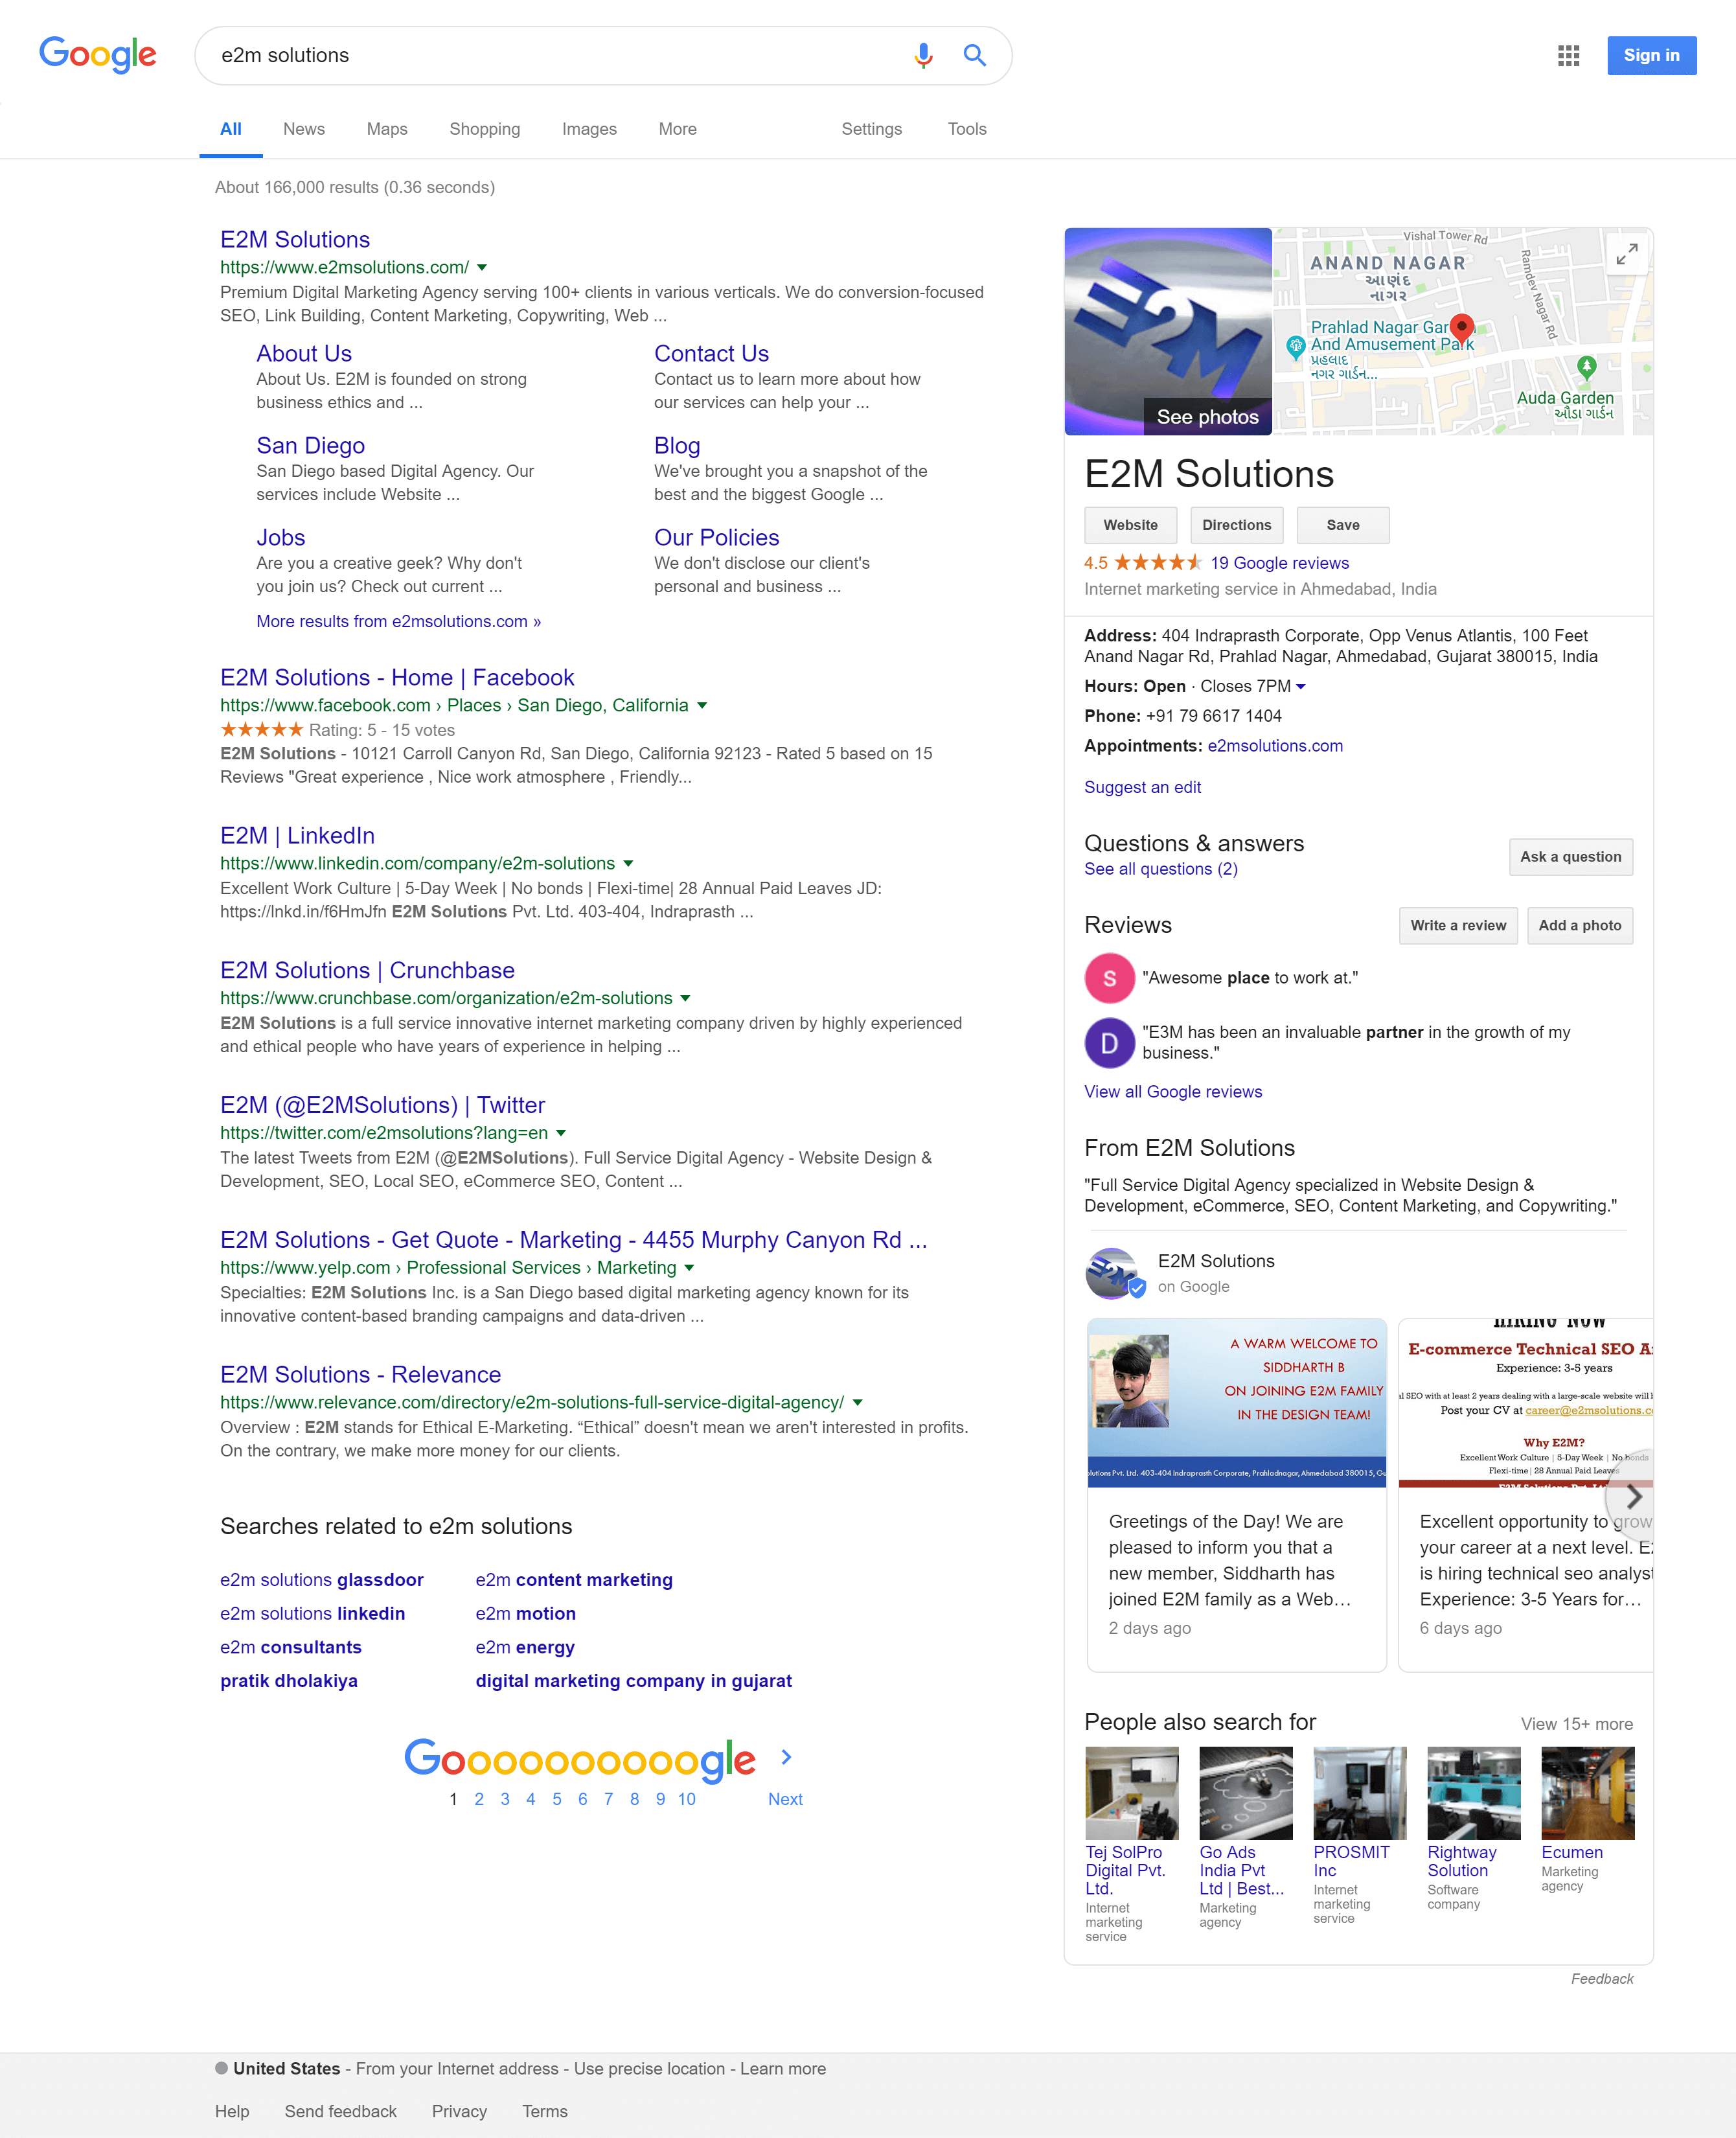 E2M Solutions Appear in The Google Search Result Page